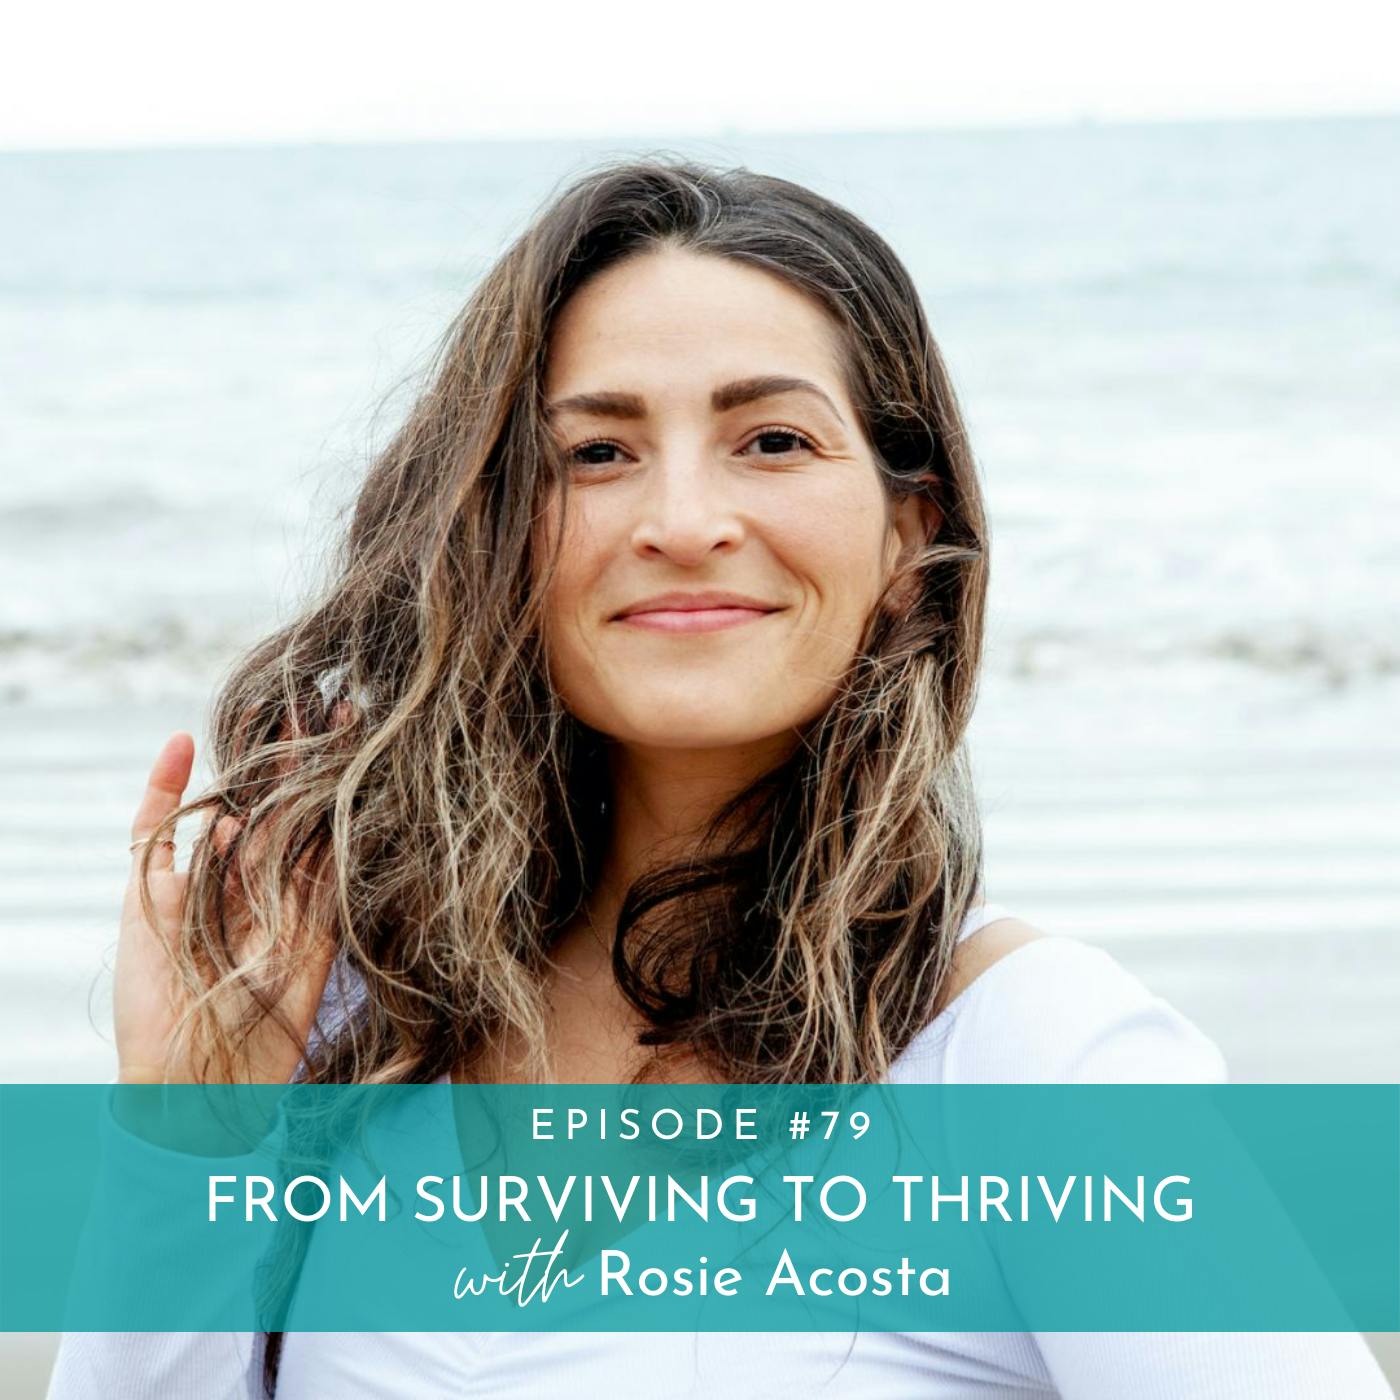 From Surviving to Thriving with Rosie Acosta